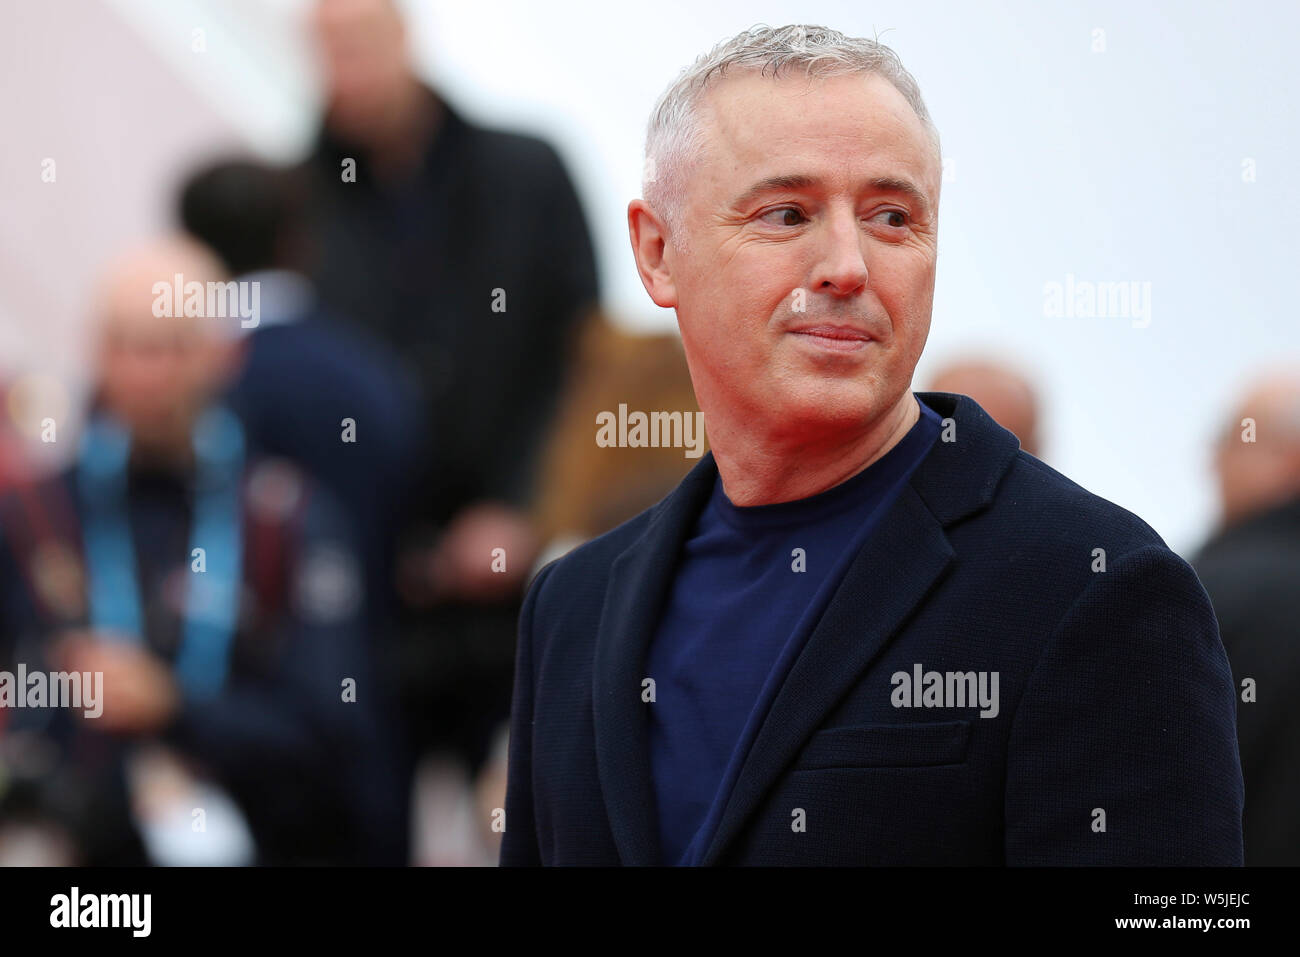 CANNES, FRANCE - MAY 18: Robin Campillo attends The Wild Goose Lake screening during the 72nd Cannes Film Festival (Mickael Chavet) Stock Photo